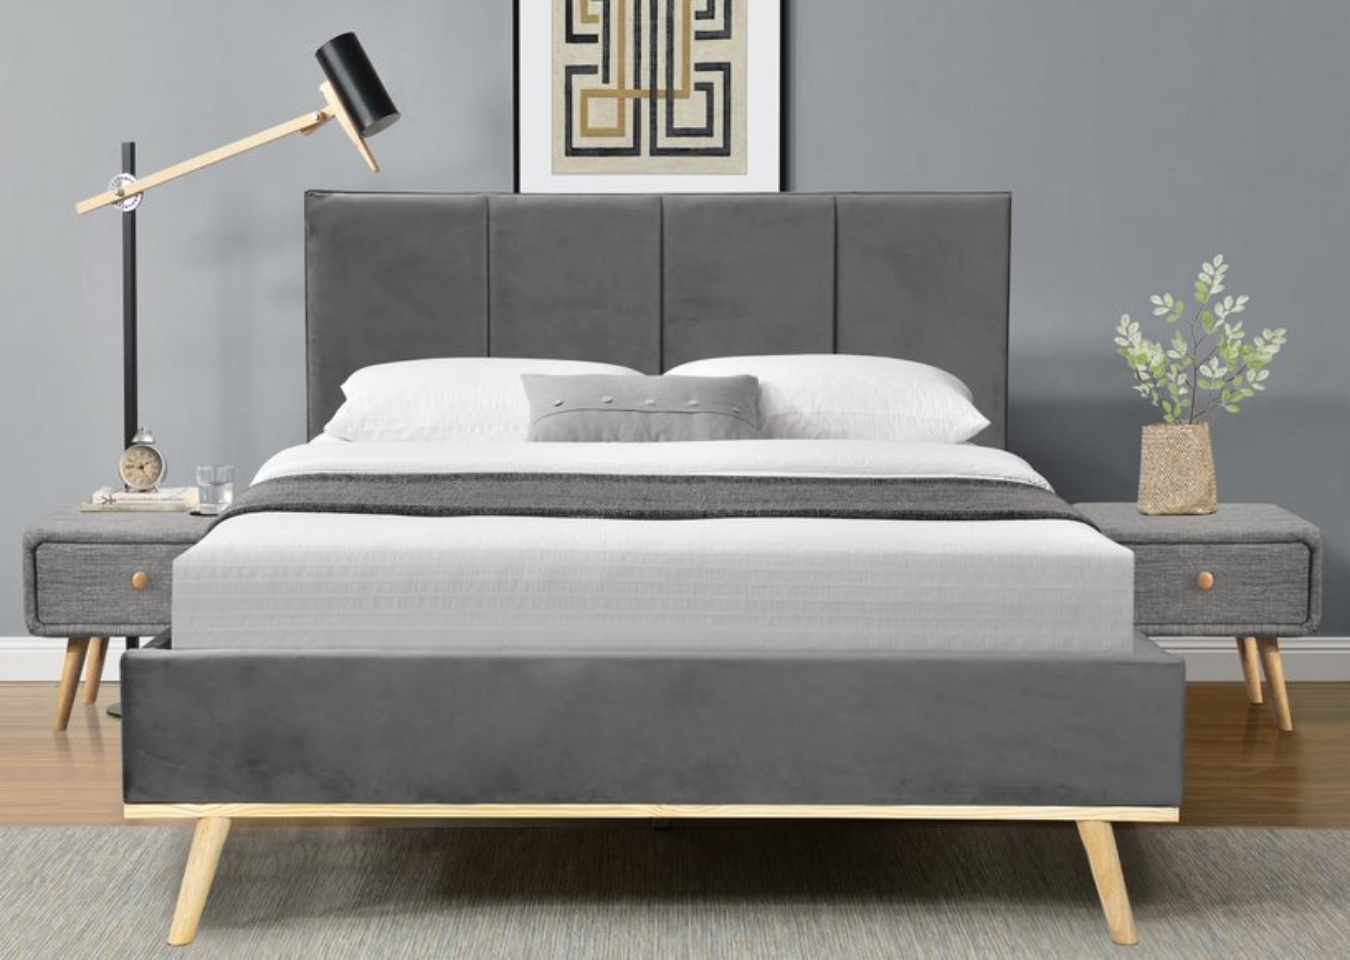 If you are looking for a bed which will be the focal point of your bedroom, this Matthew velvet fabric bed frame will be the best option.